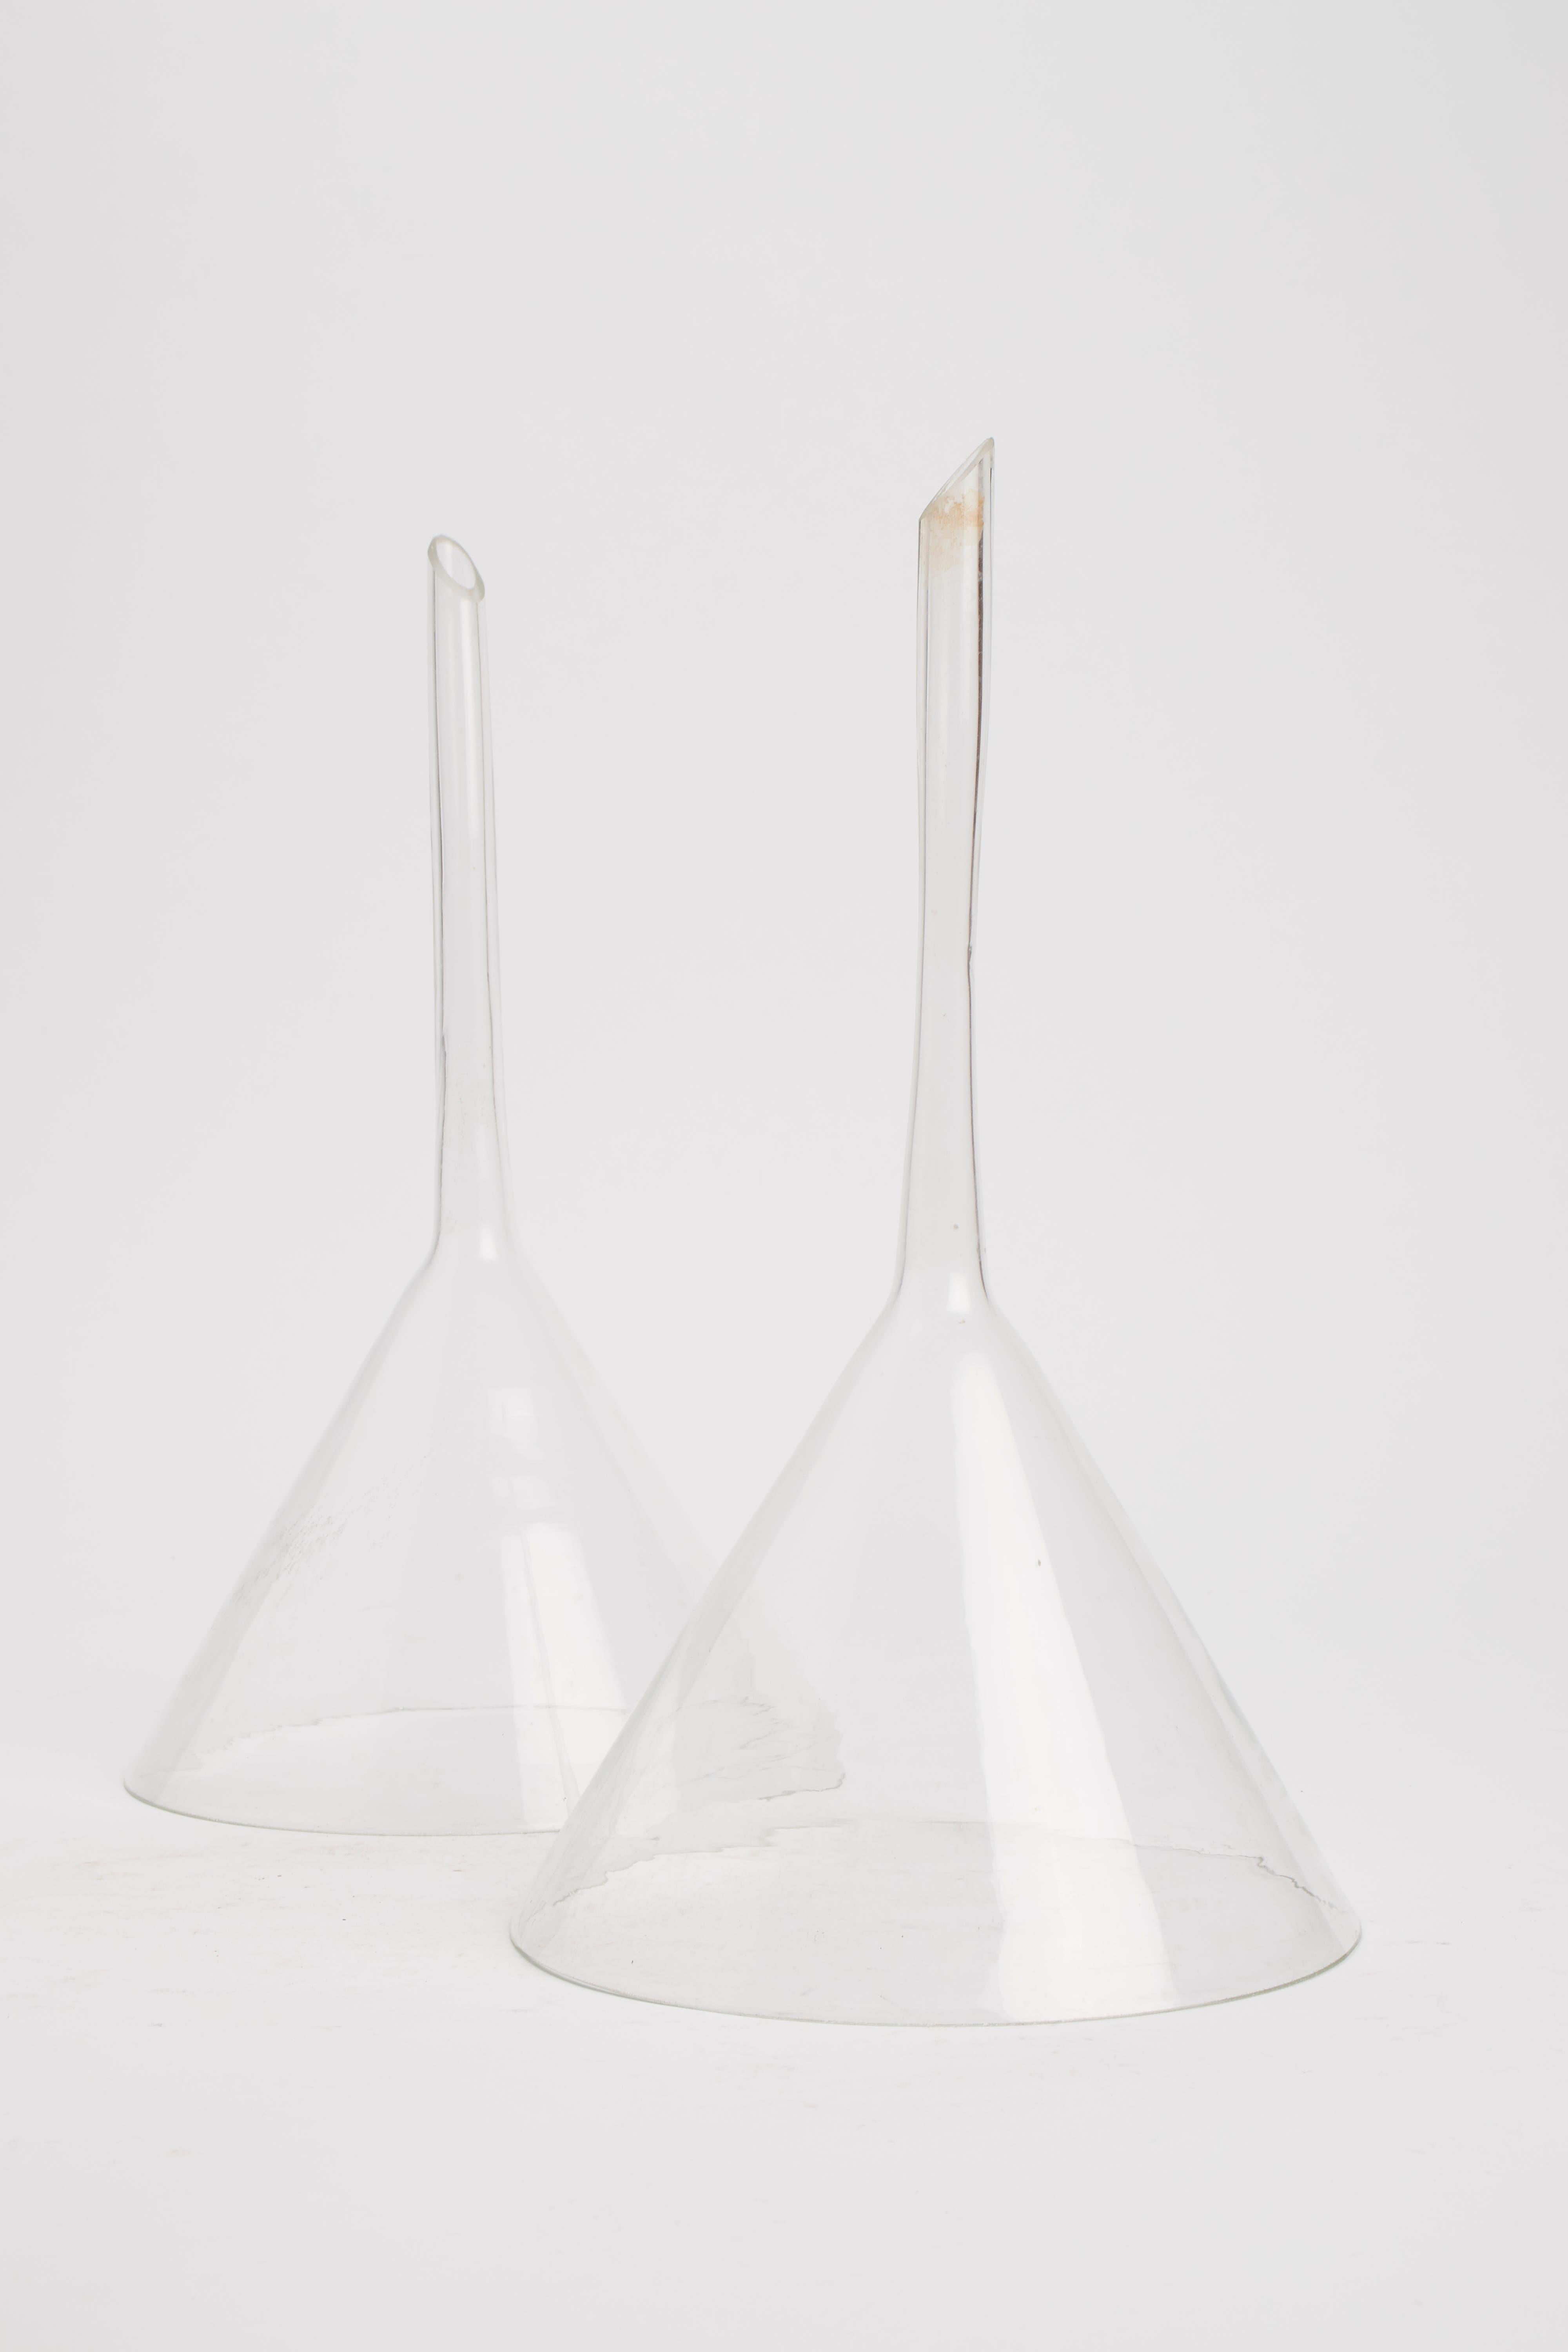 Italian Apothecary glass funnels, Italy 1800. For Sale